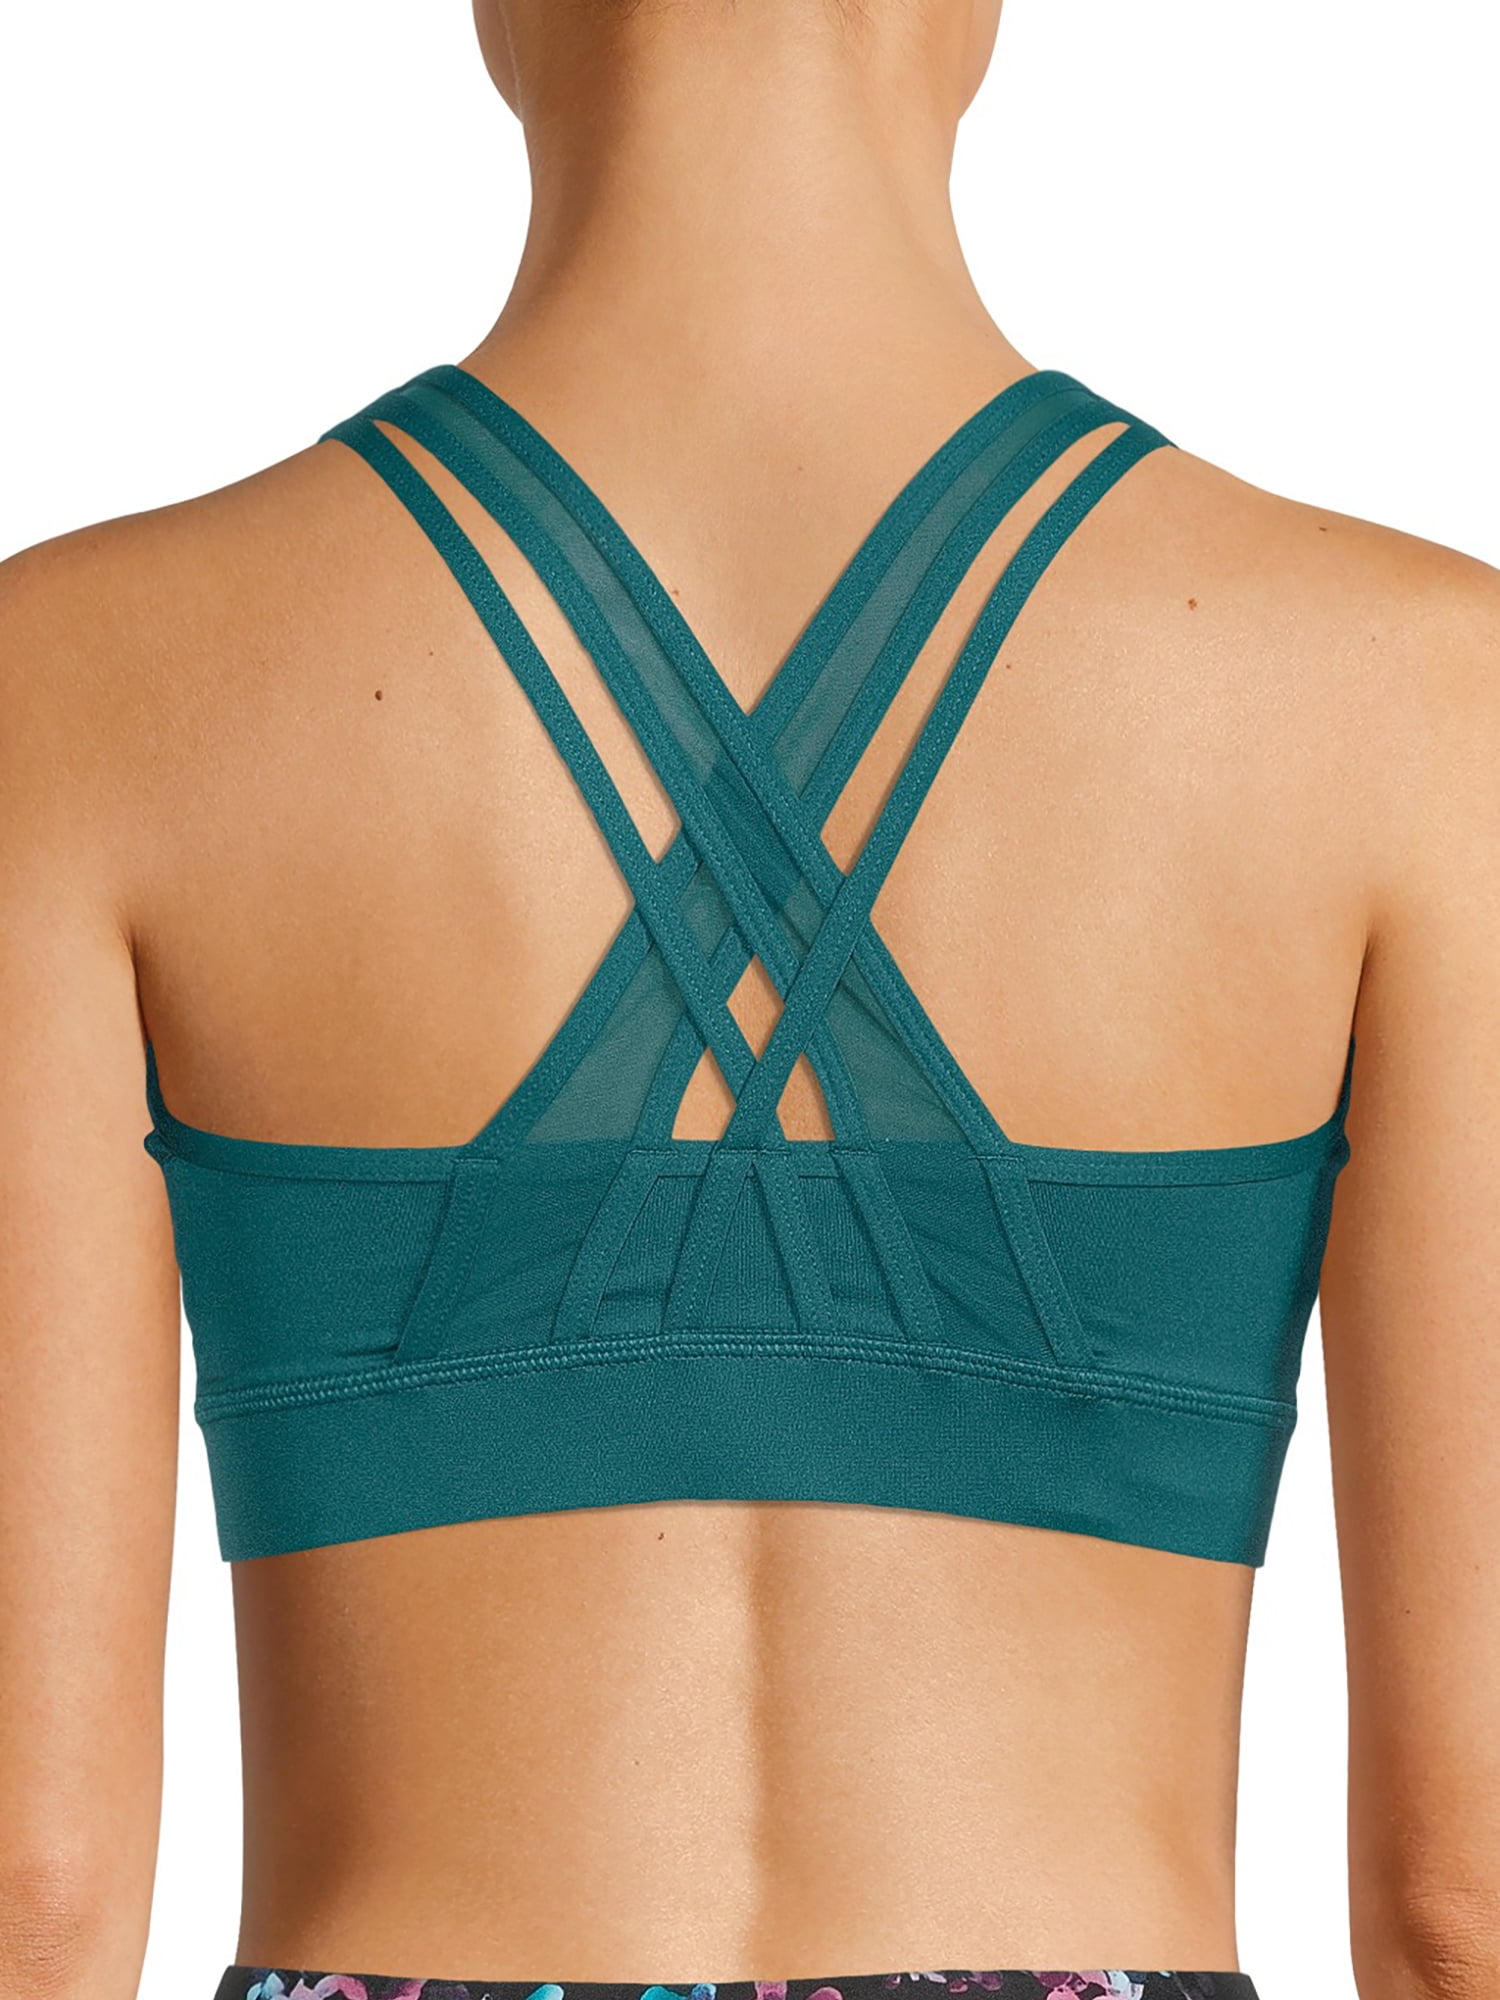 NEW tags-Avia Sport Sports Bra-choose size & color-medium support-athletic  wear